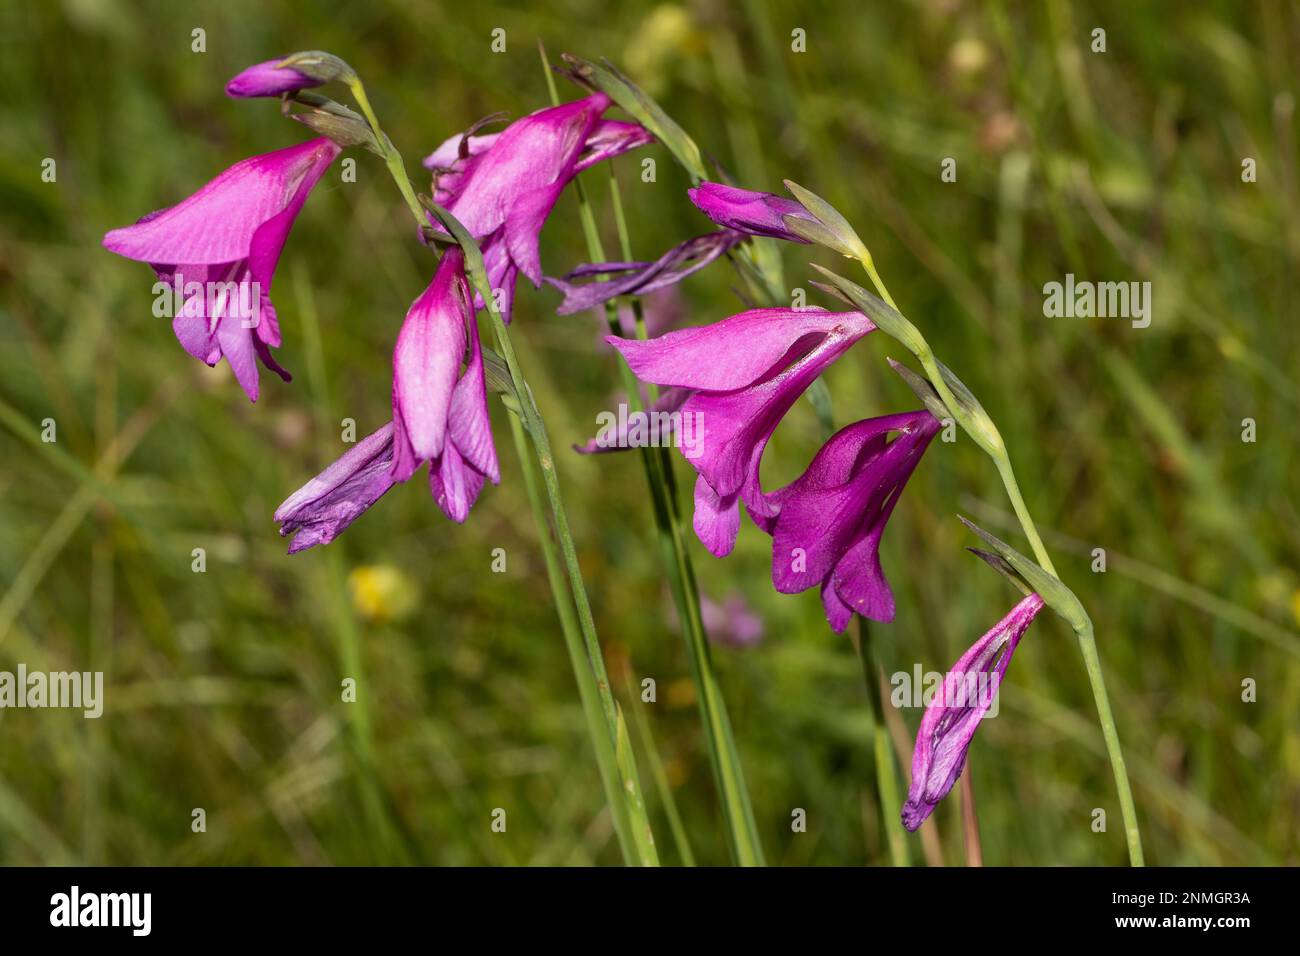 Marsh gladiolus some flower panicles with several open red flowers Stock Photo